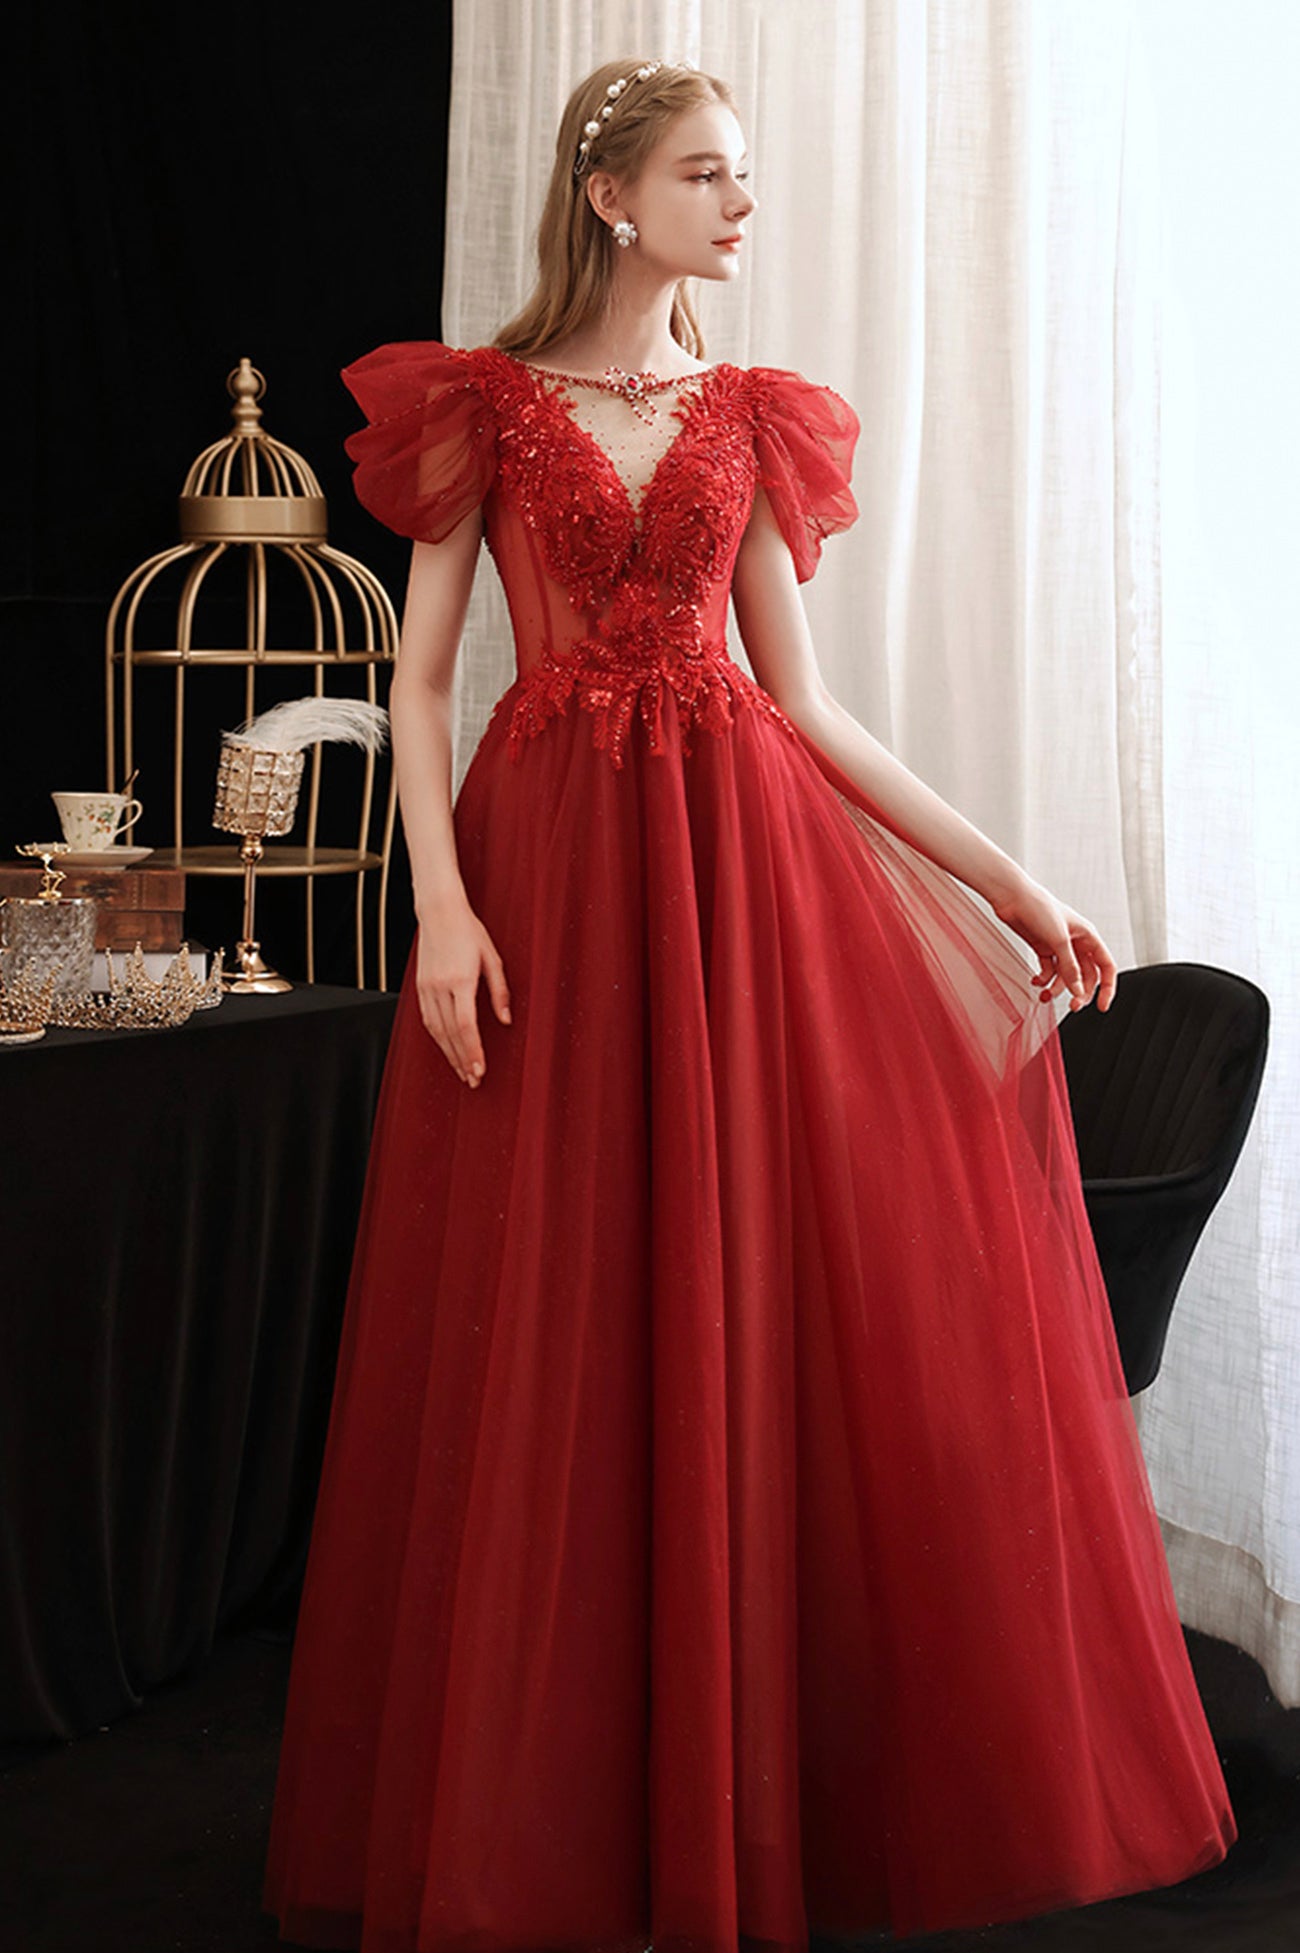 Burgundy Lace Long Prom Dress with Sequins, Cute Puff Sleeve Graduation Dress